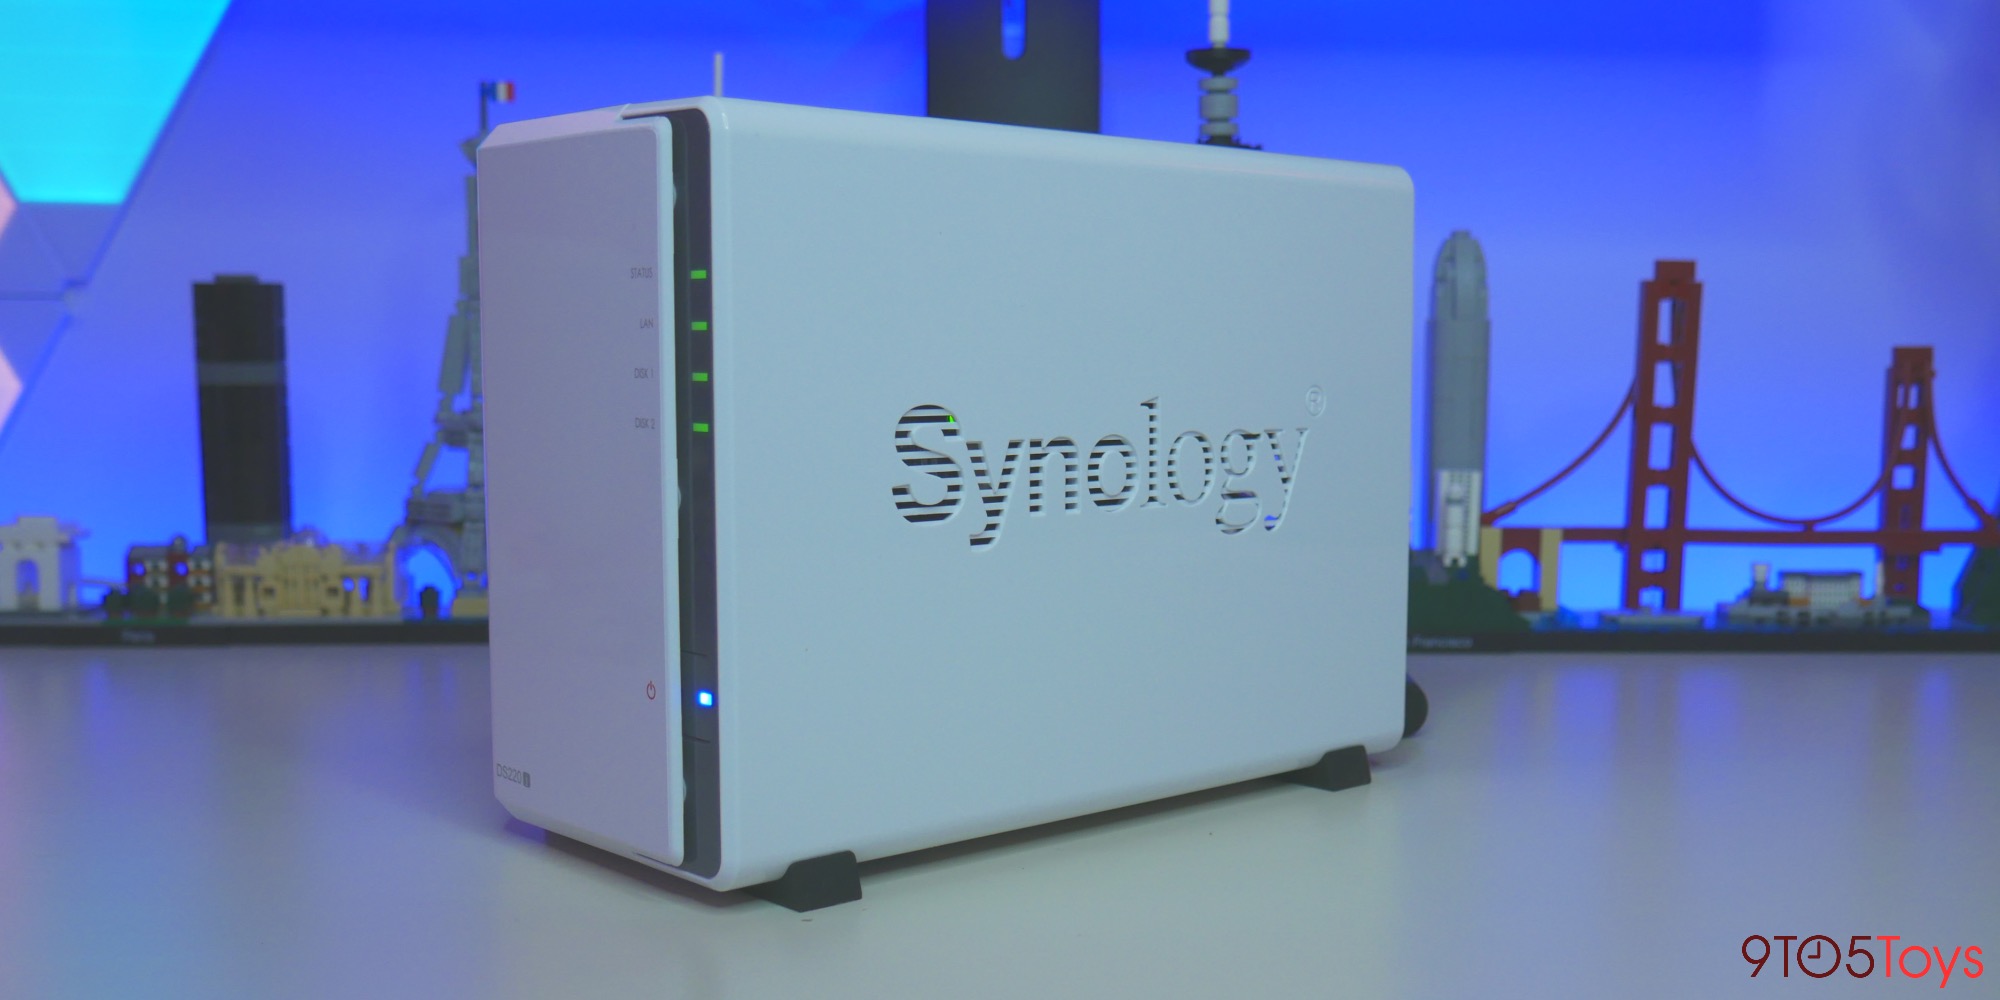 World Backup Day: Getting started with Synology DS220J NAS - 9to5Toys